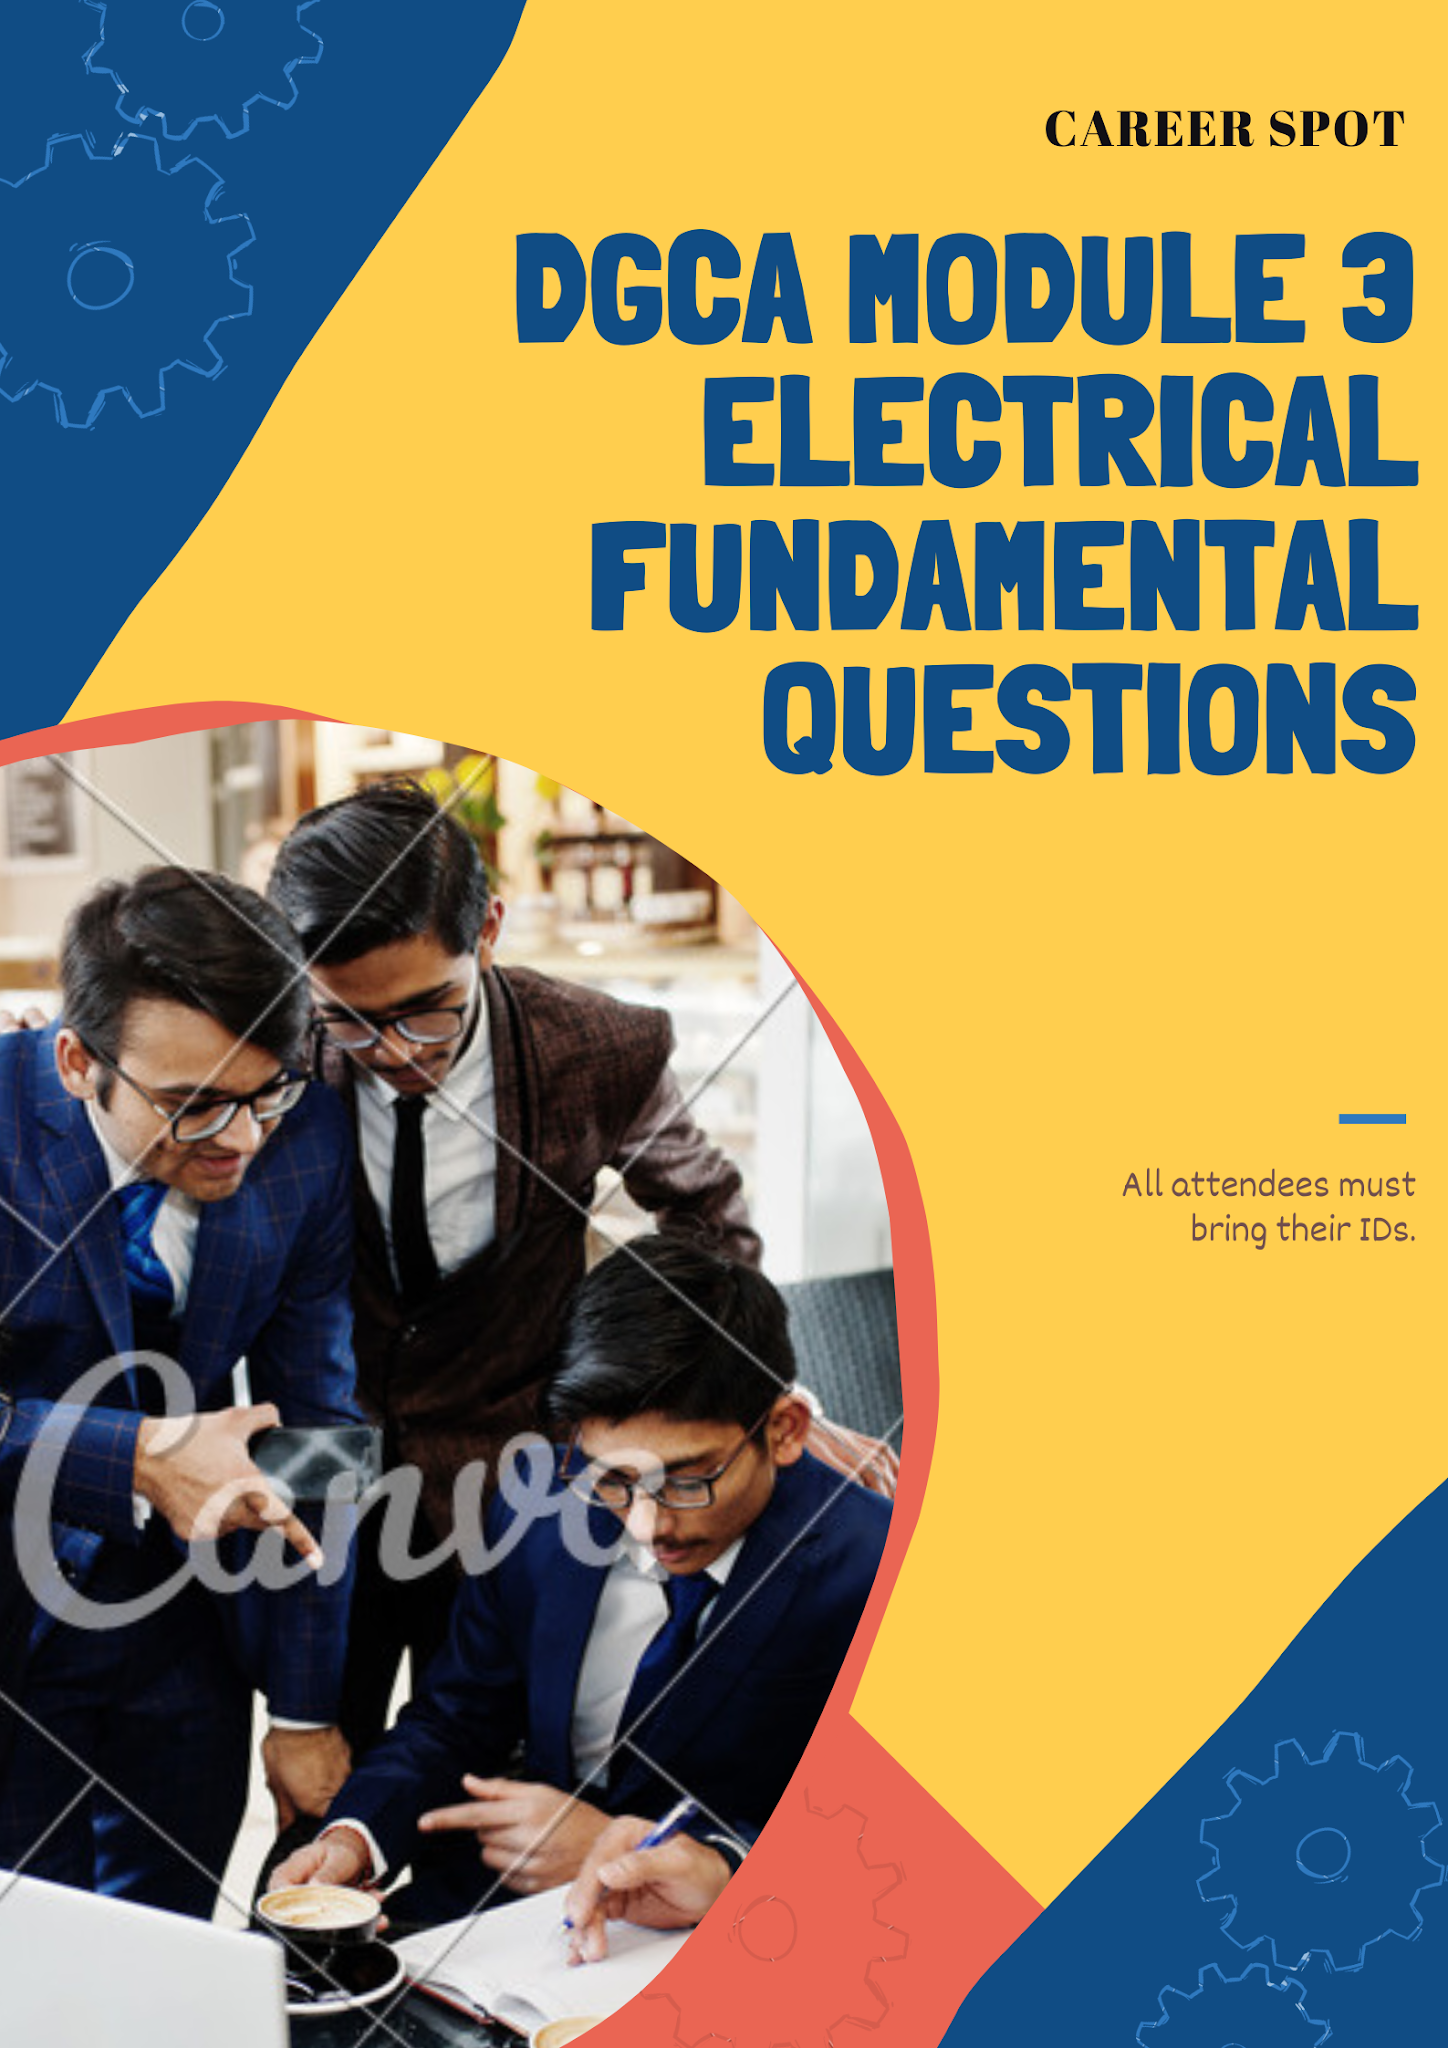 easa module 10 essay questions and answers pdf